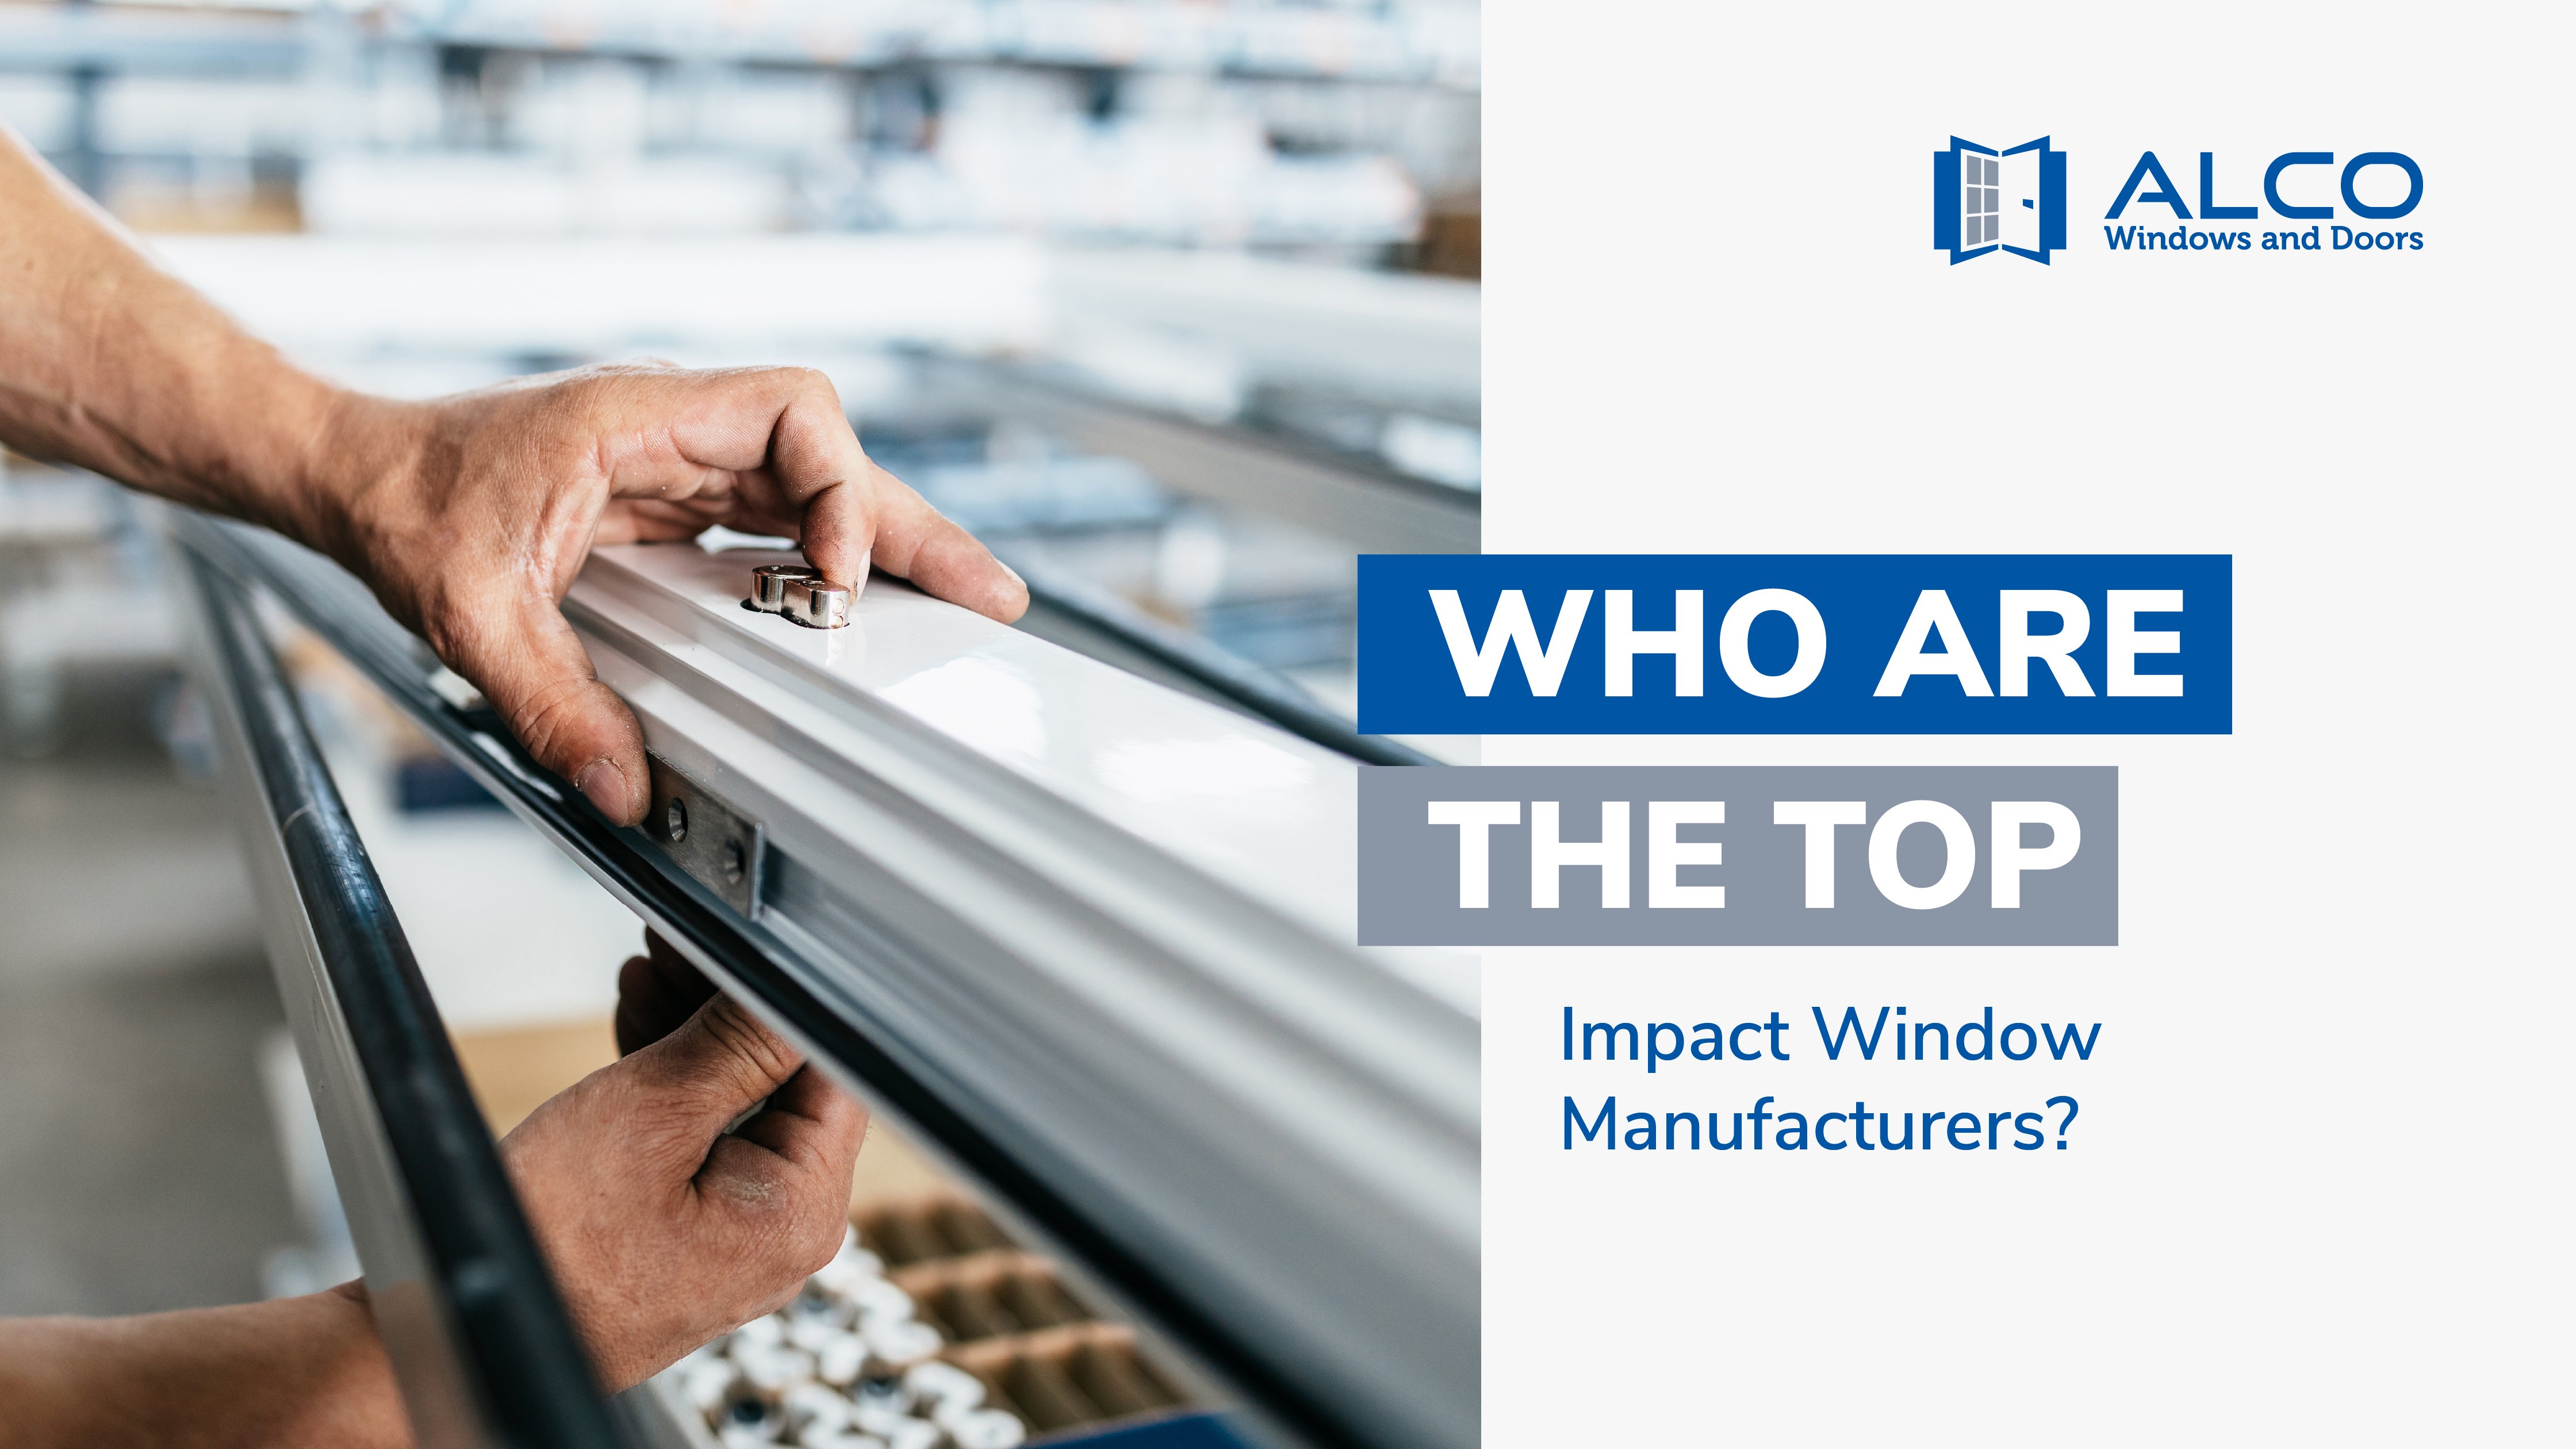 Are the Top Impact Window